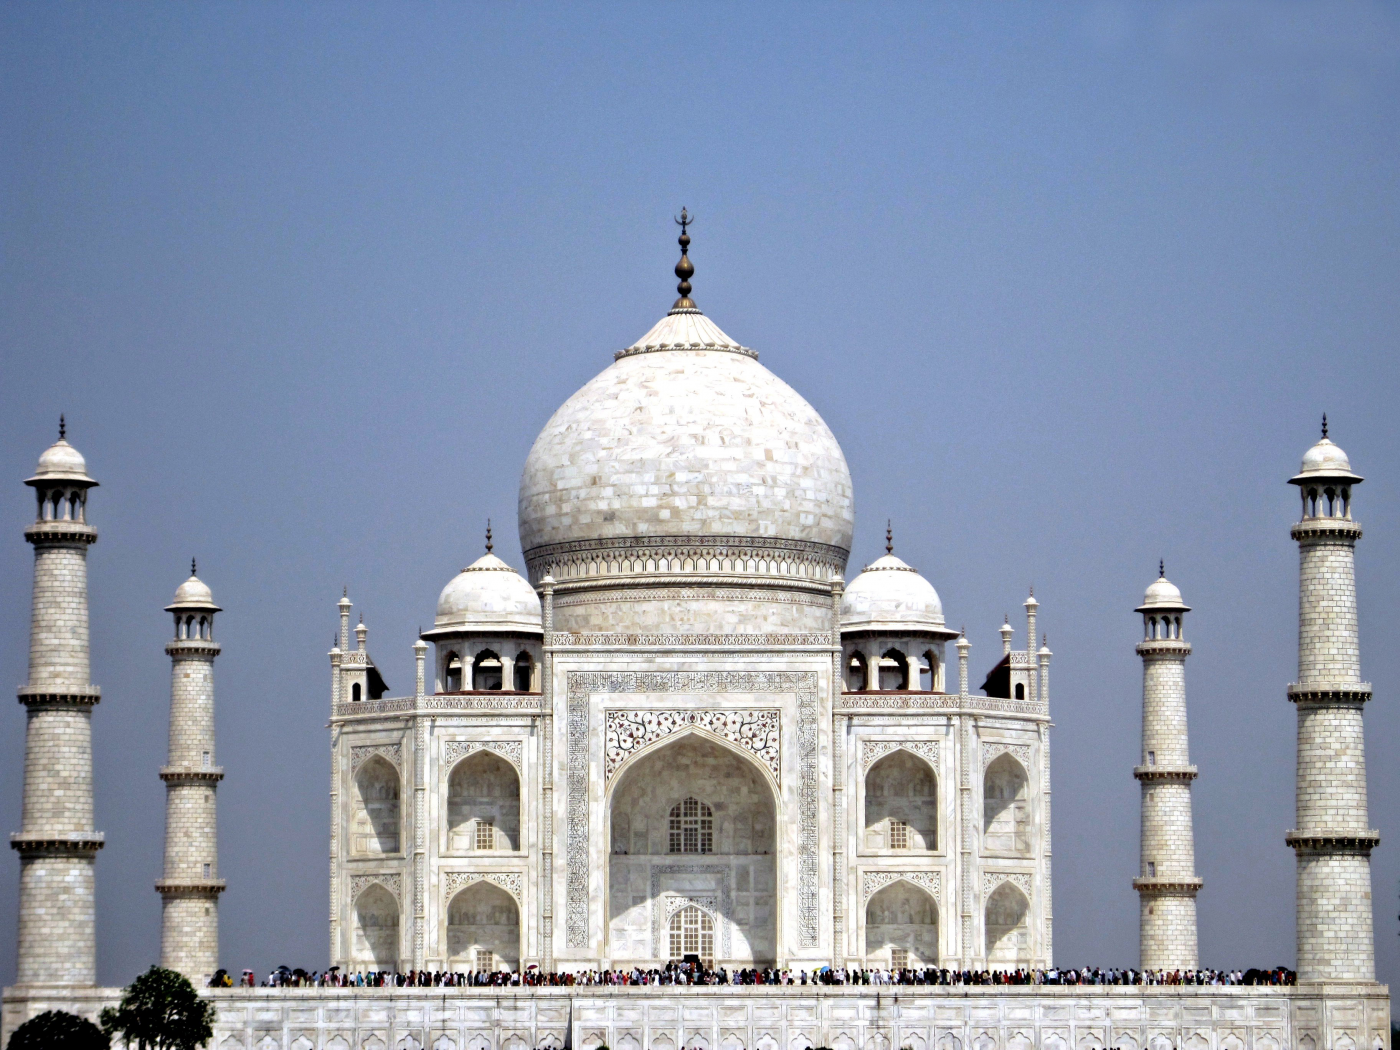 best, buildings, super, nature, taj mahal, cool, superb, amazing, people, awesome, wow, perfect